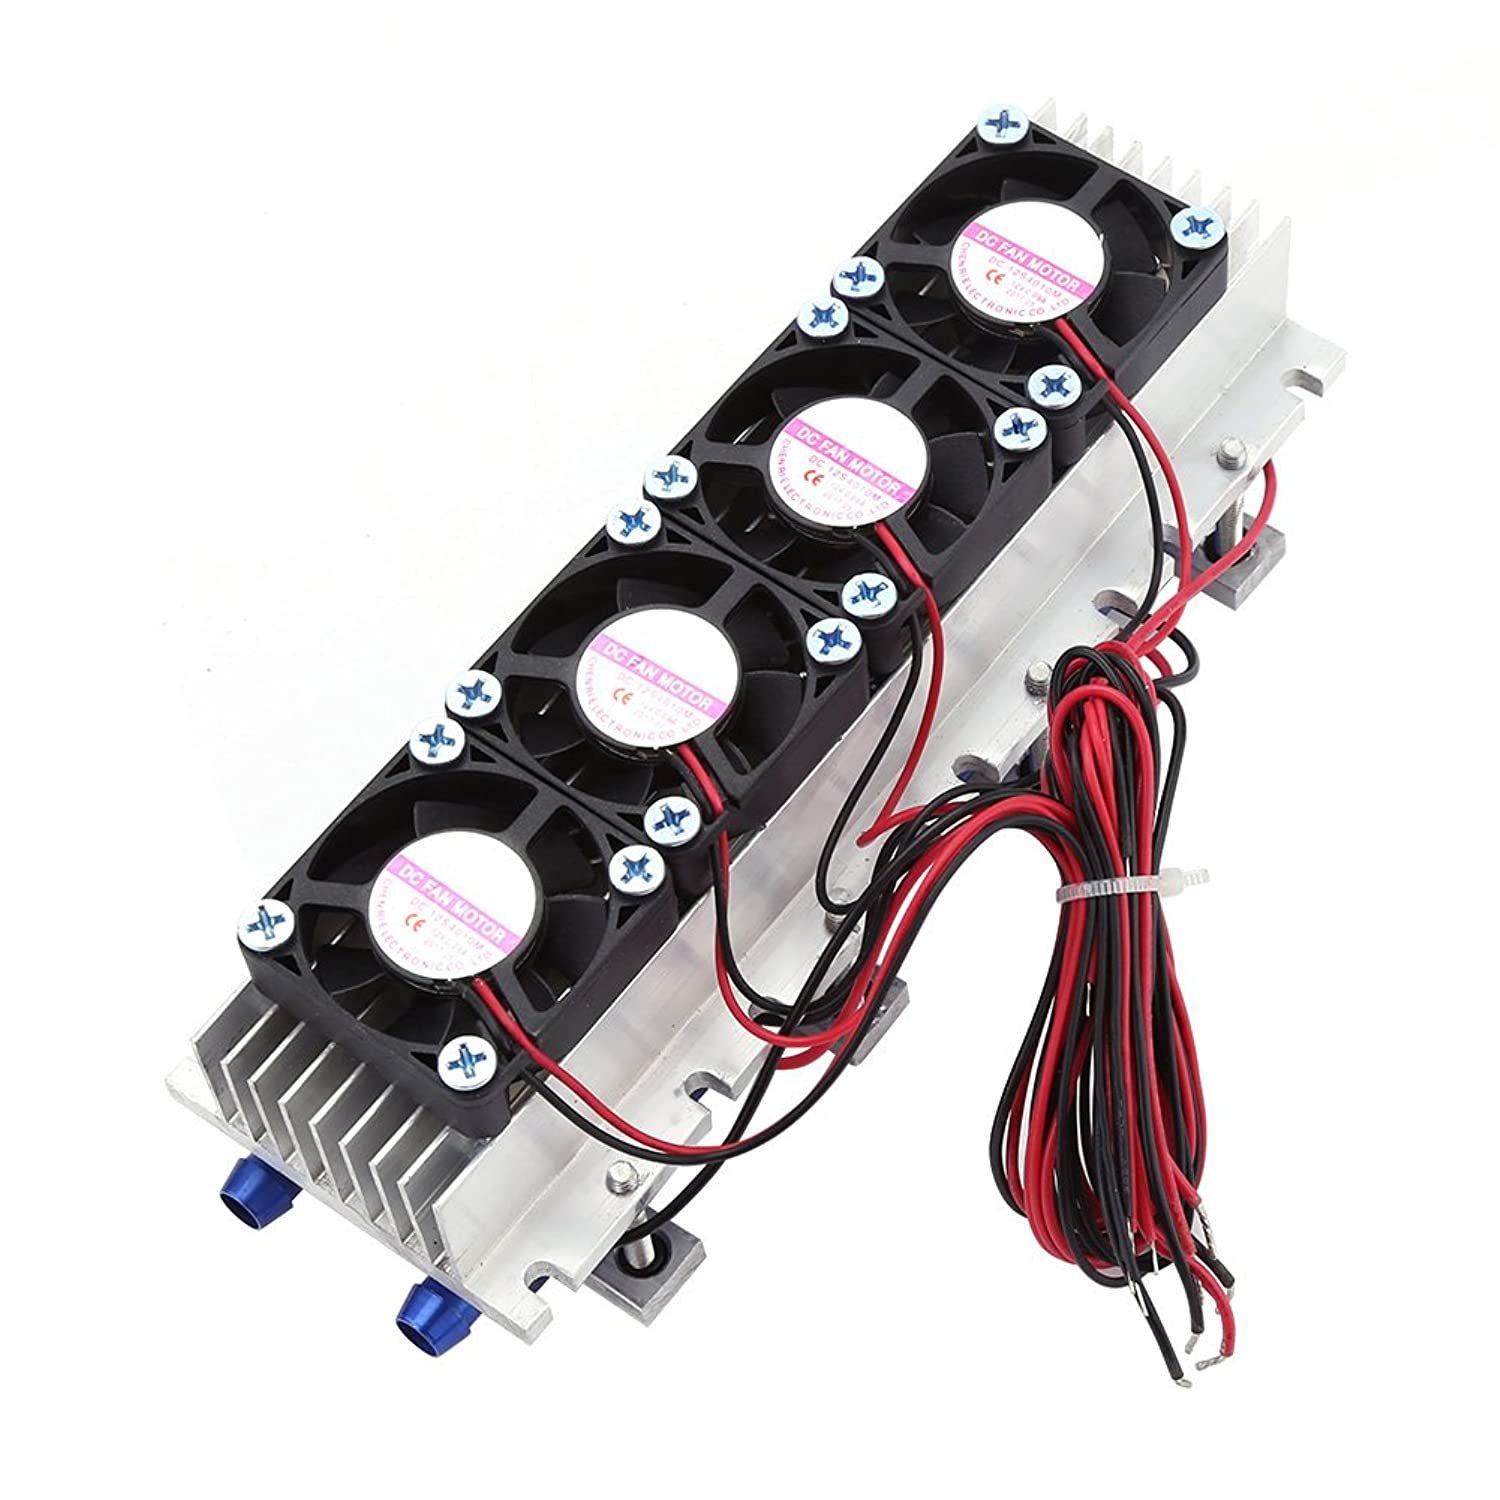 12V 4-Chip Tec1-12706 Refrigeration Cooling System Kit Diy Thermoelectric Cooler Module Semiconduc